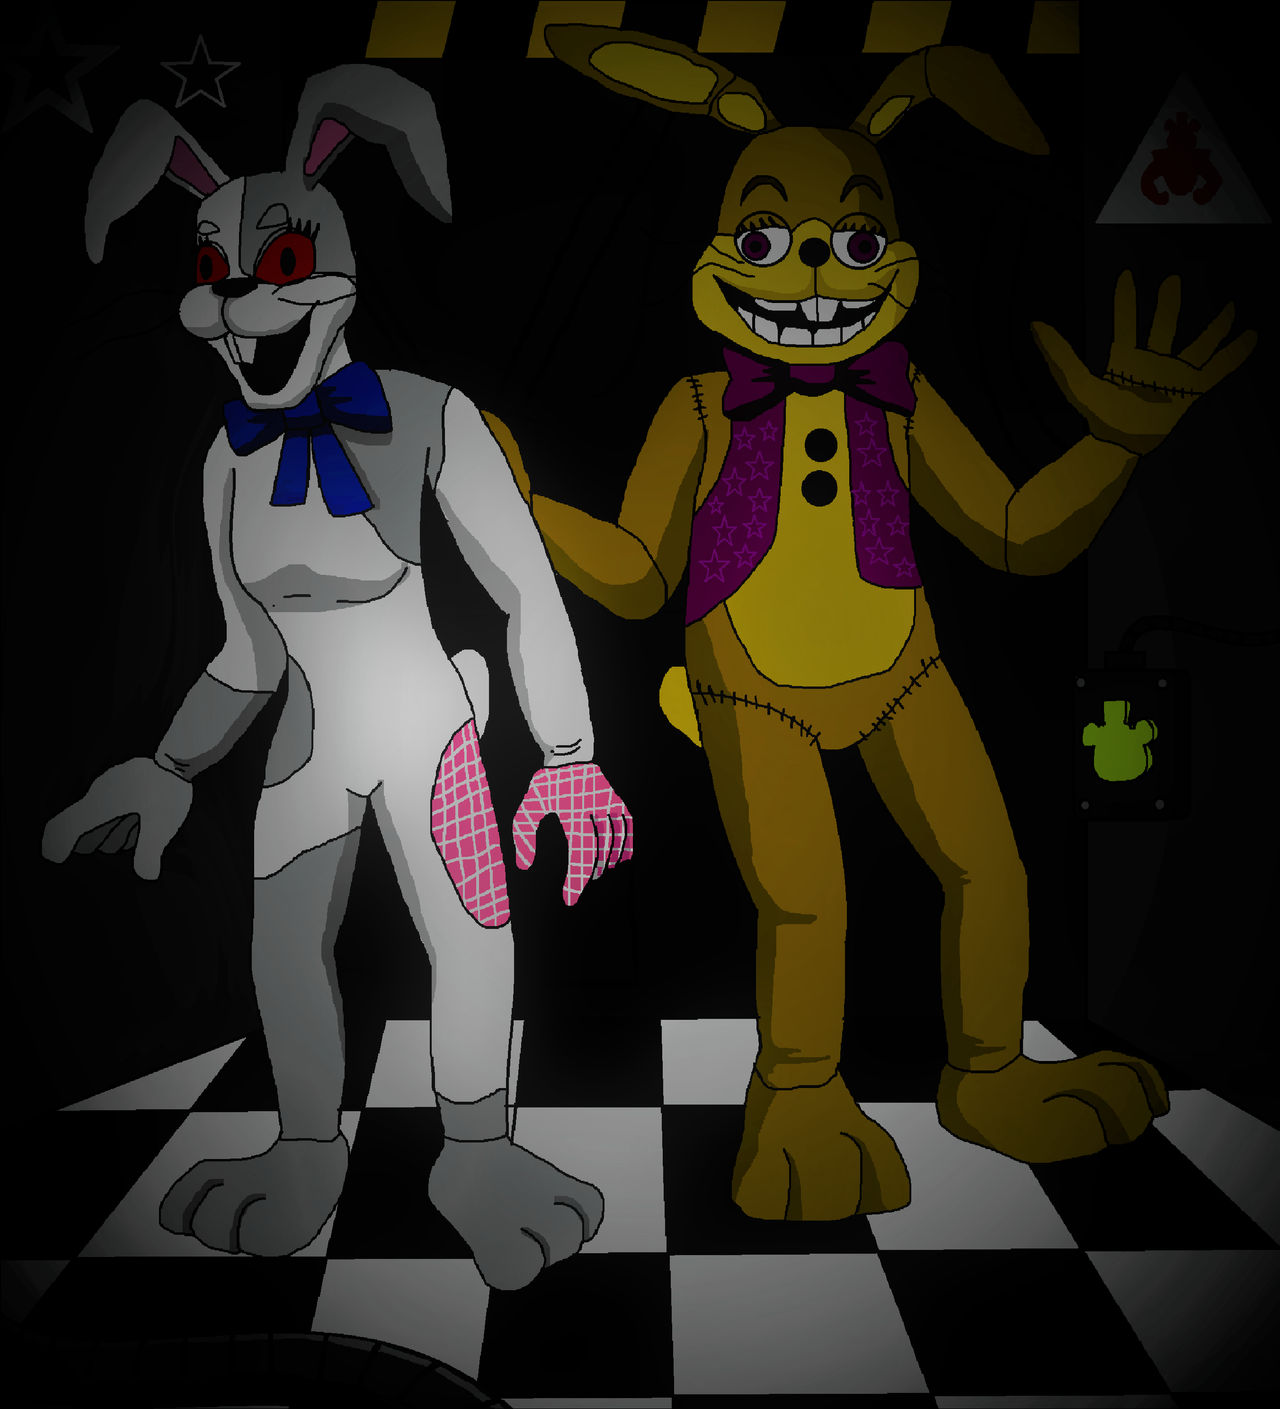 vanny, glitchtrap, and burntrap (five nights at freddy's and 2